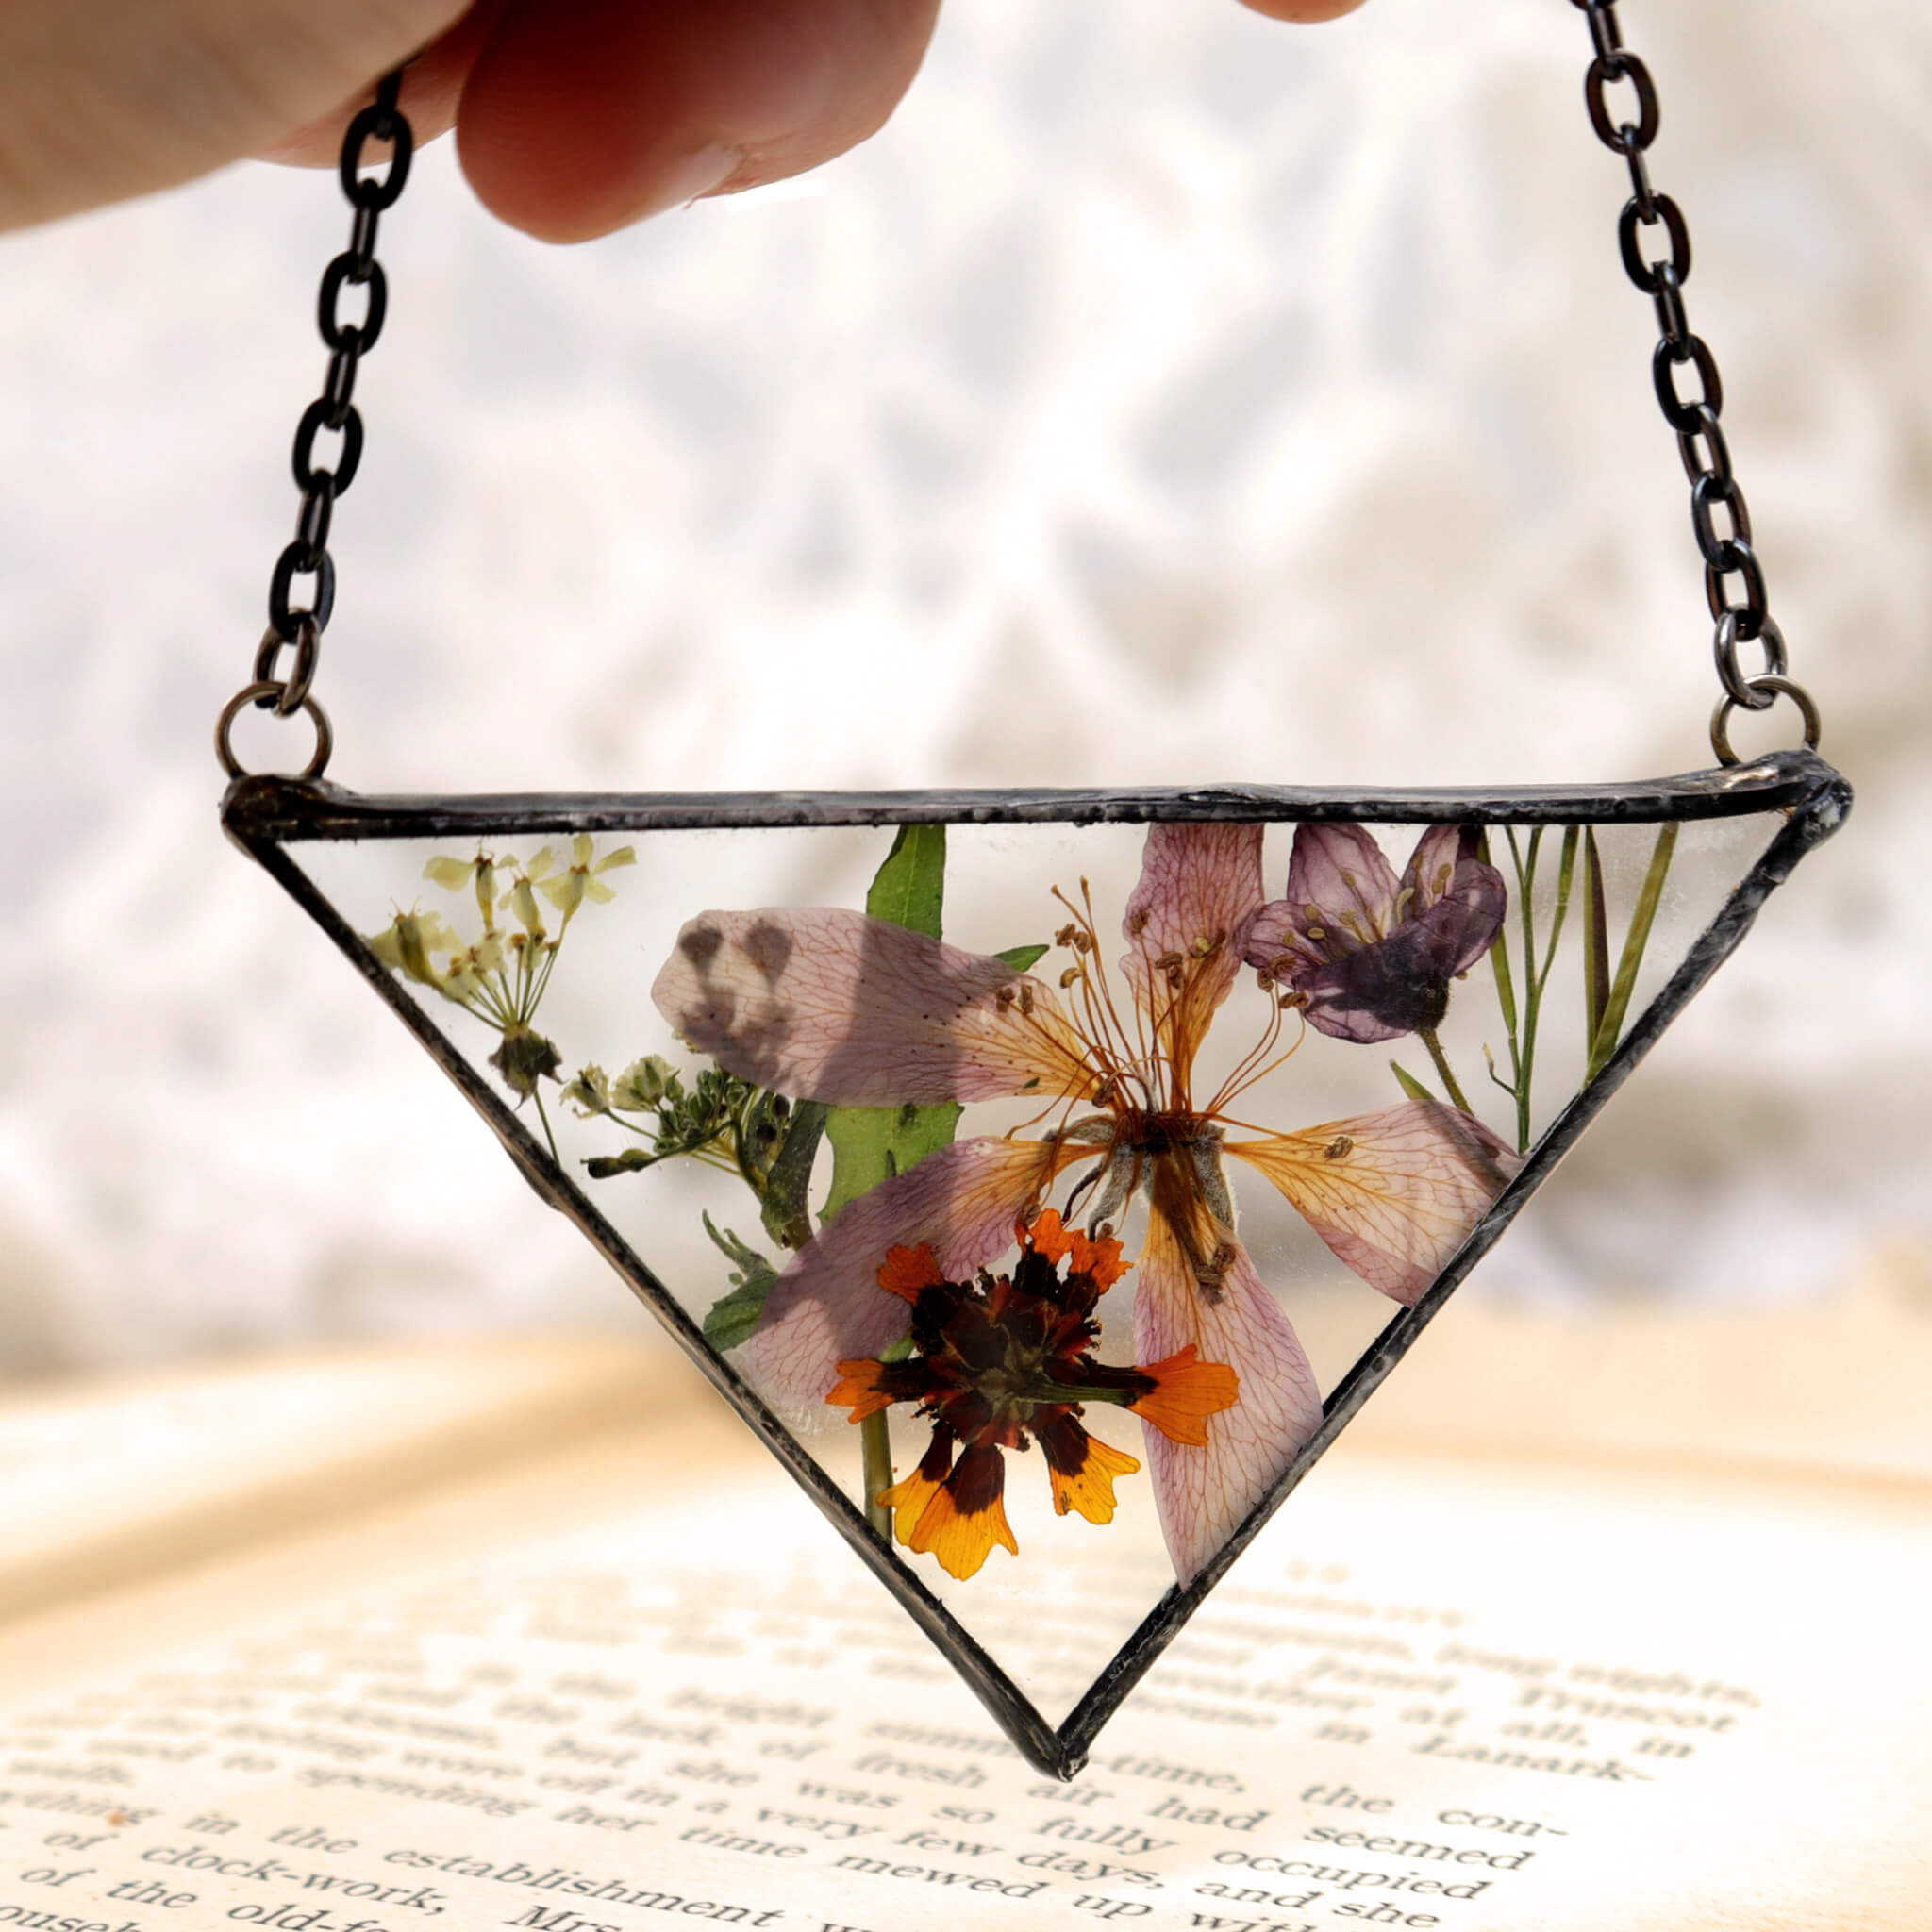 Necklace of a mix of pressed flowers in triangular soldered glass